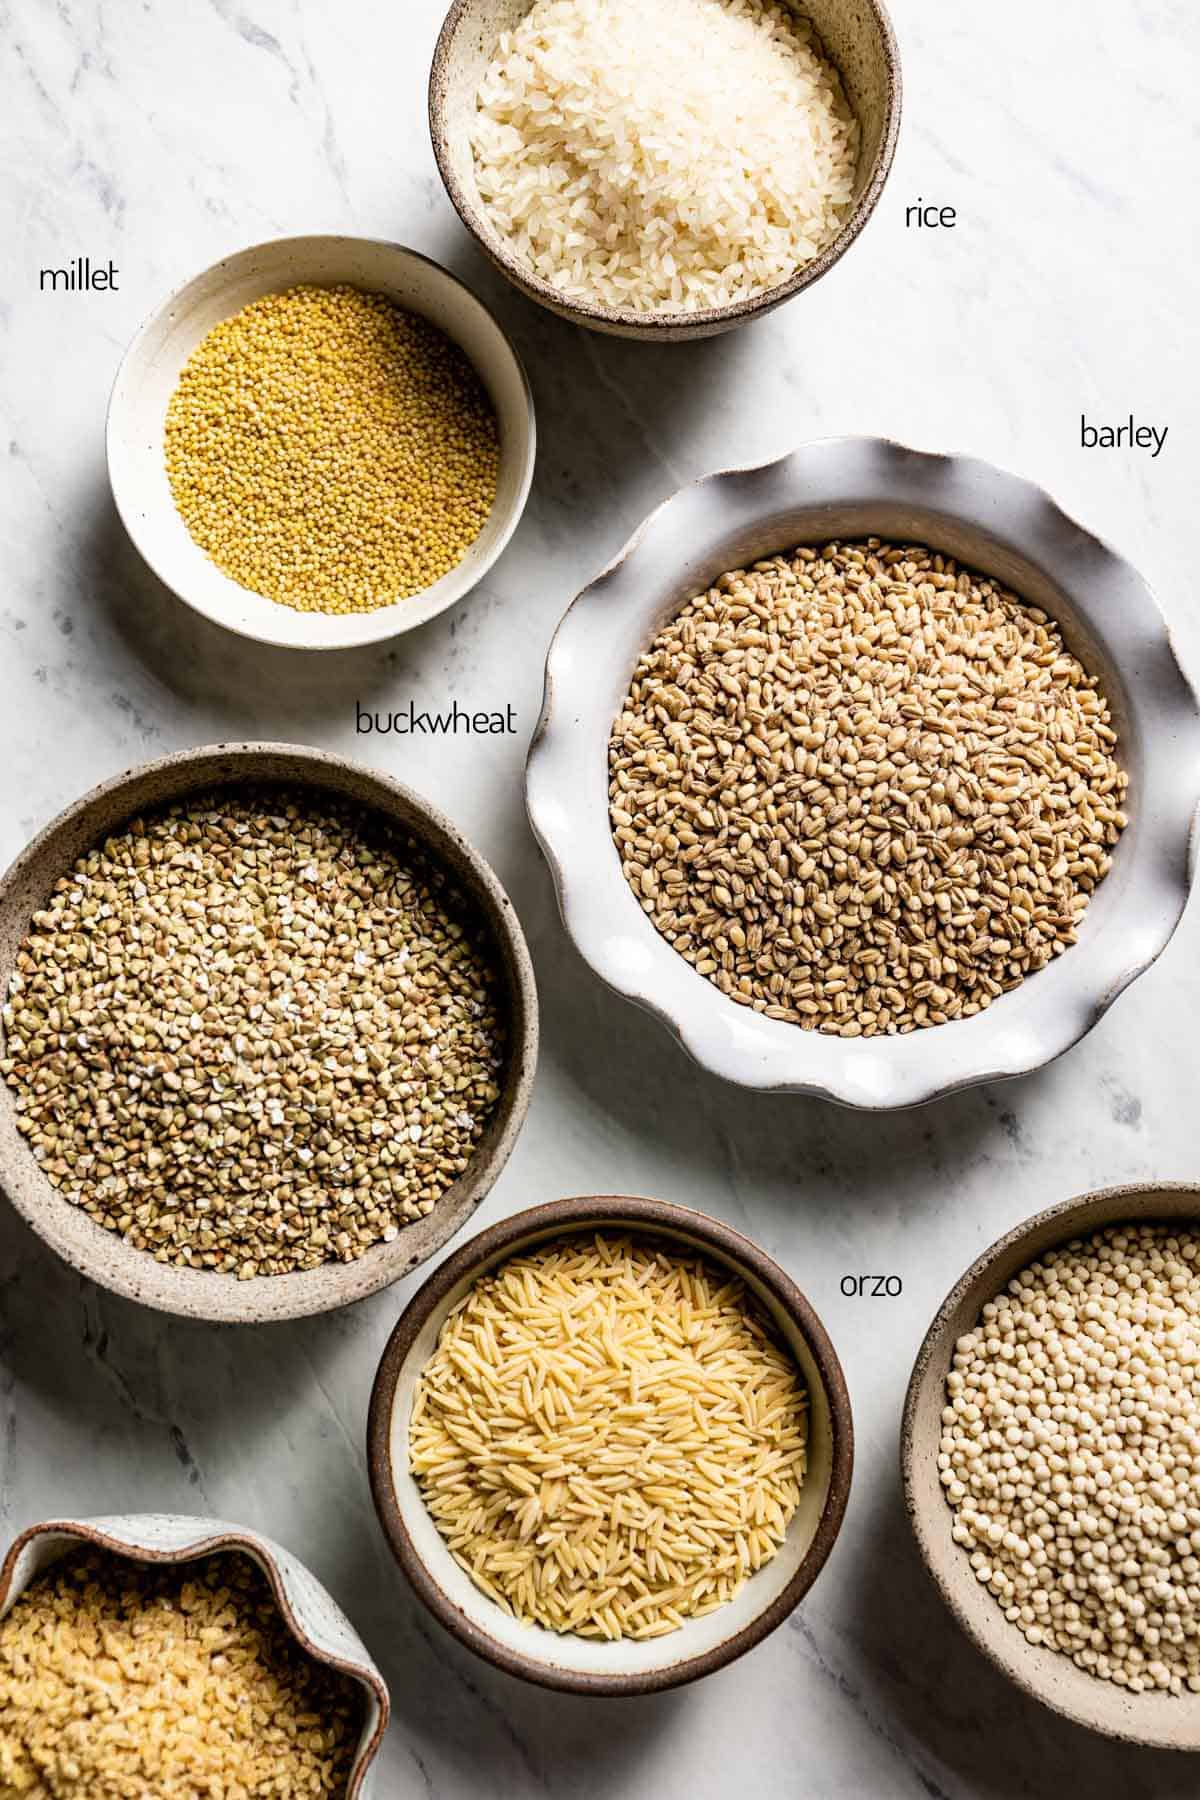 Grains considered as bulgar wheat alternatives in small bowls from the top view.